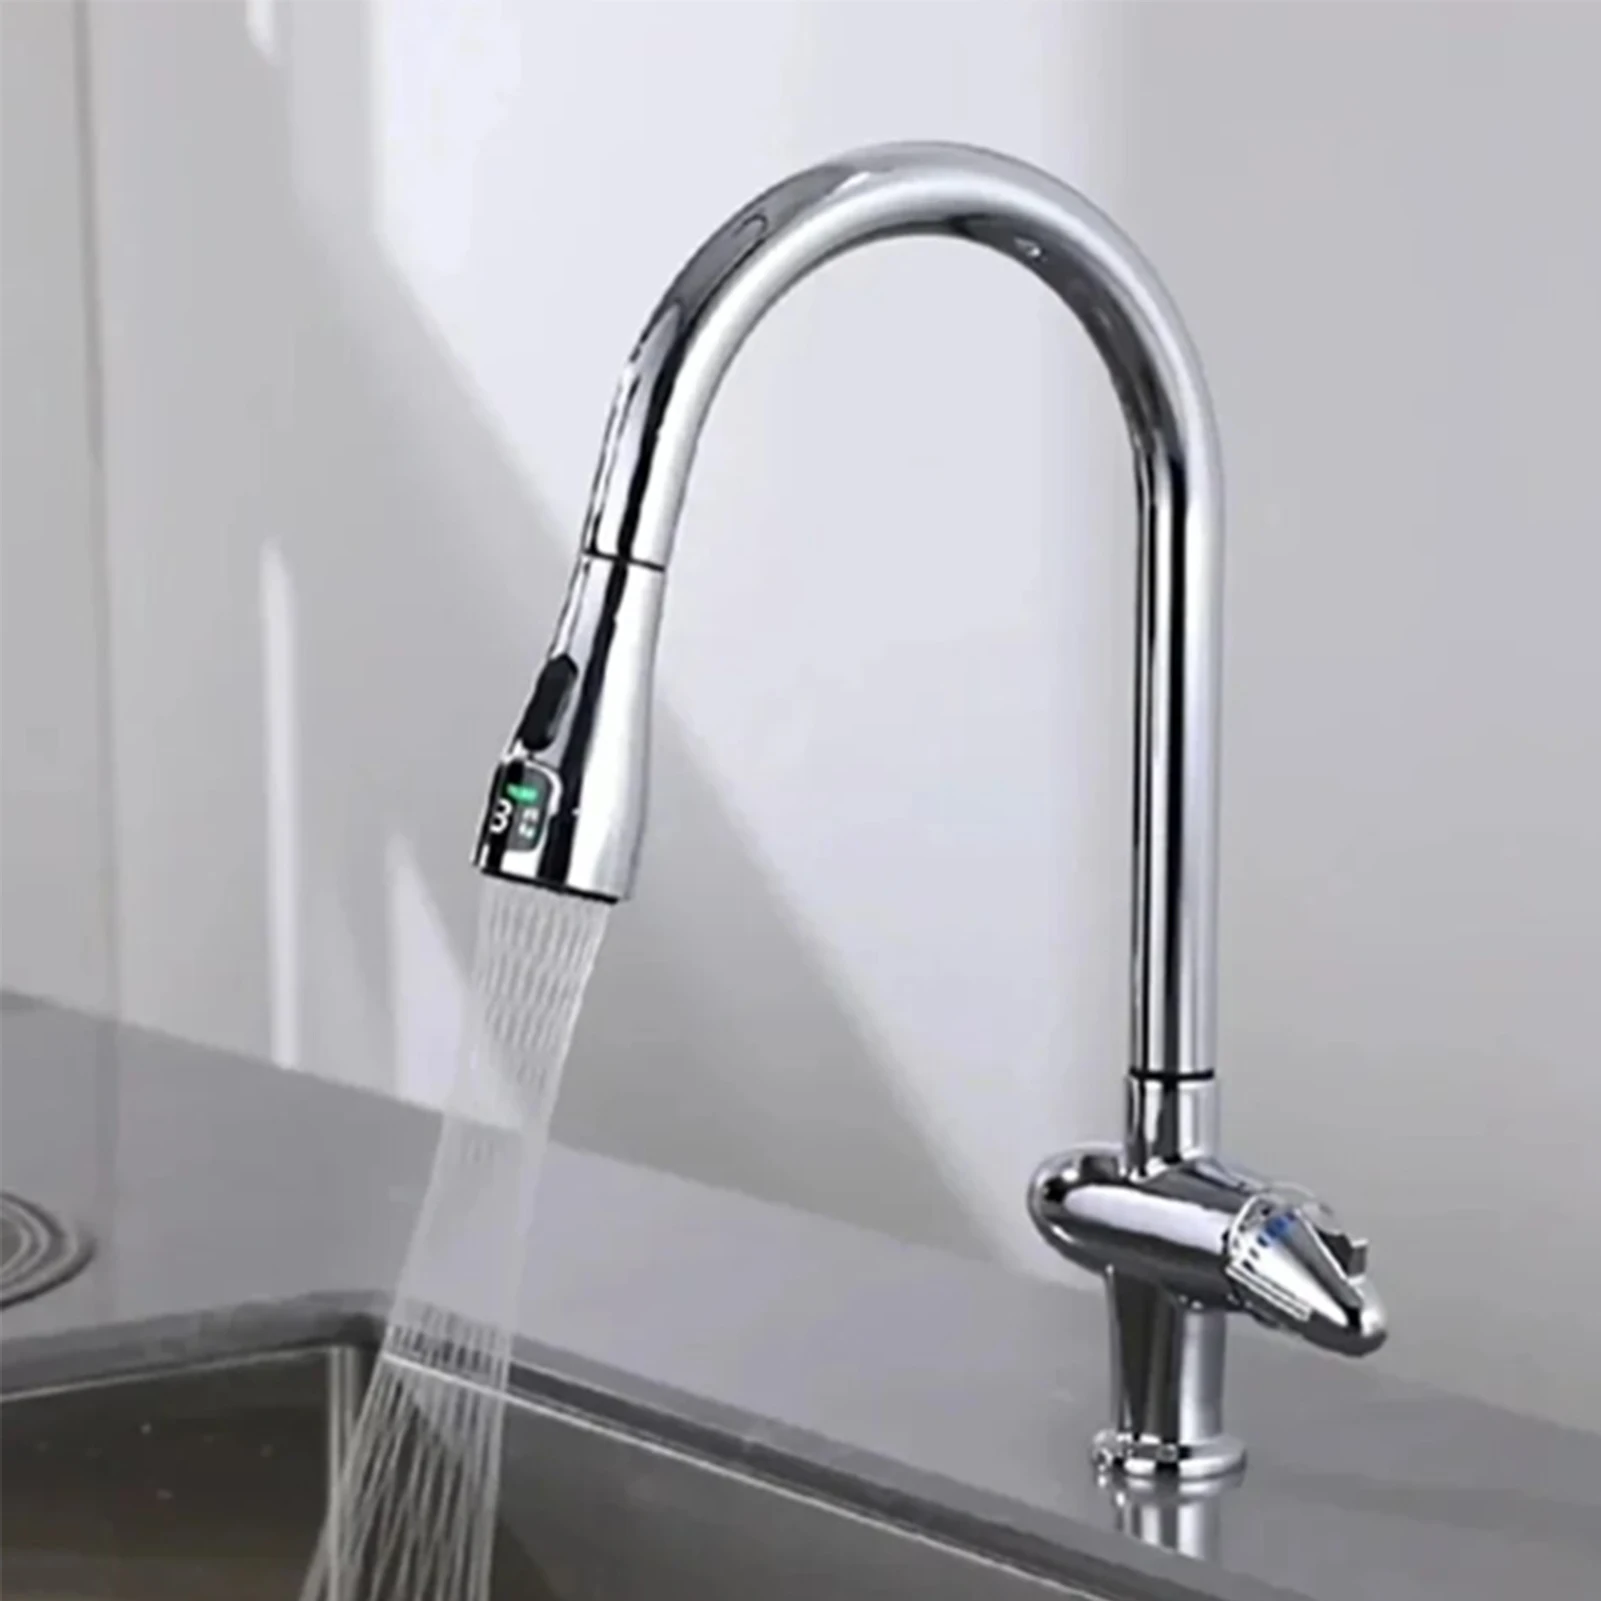 

LED Digital Display Faucet Tap Nozzle Connection Replacement Water Saving Reduce Bills Kitchen Swivel Head Water-saving Spray